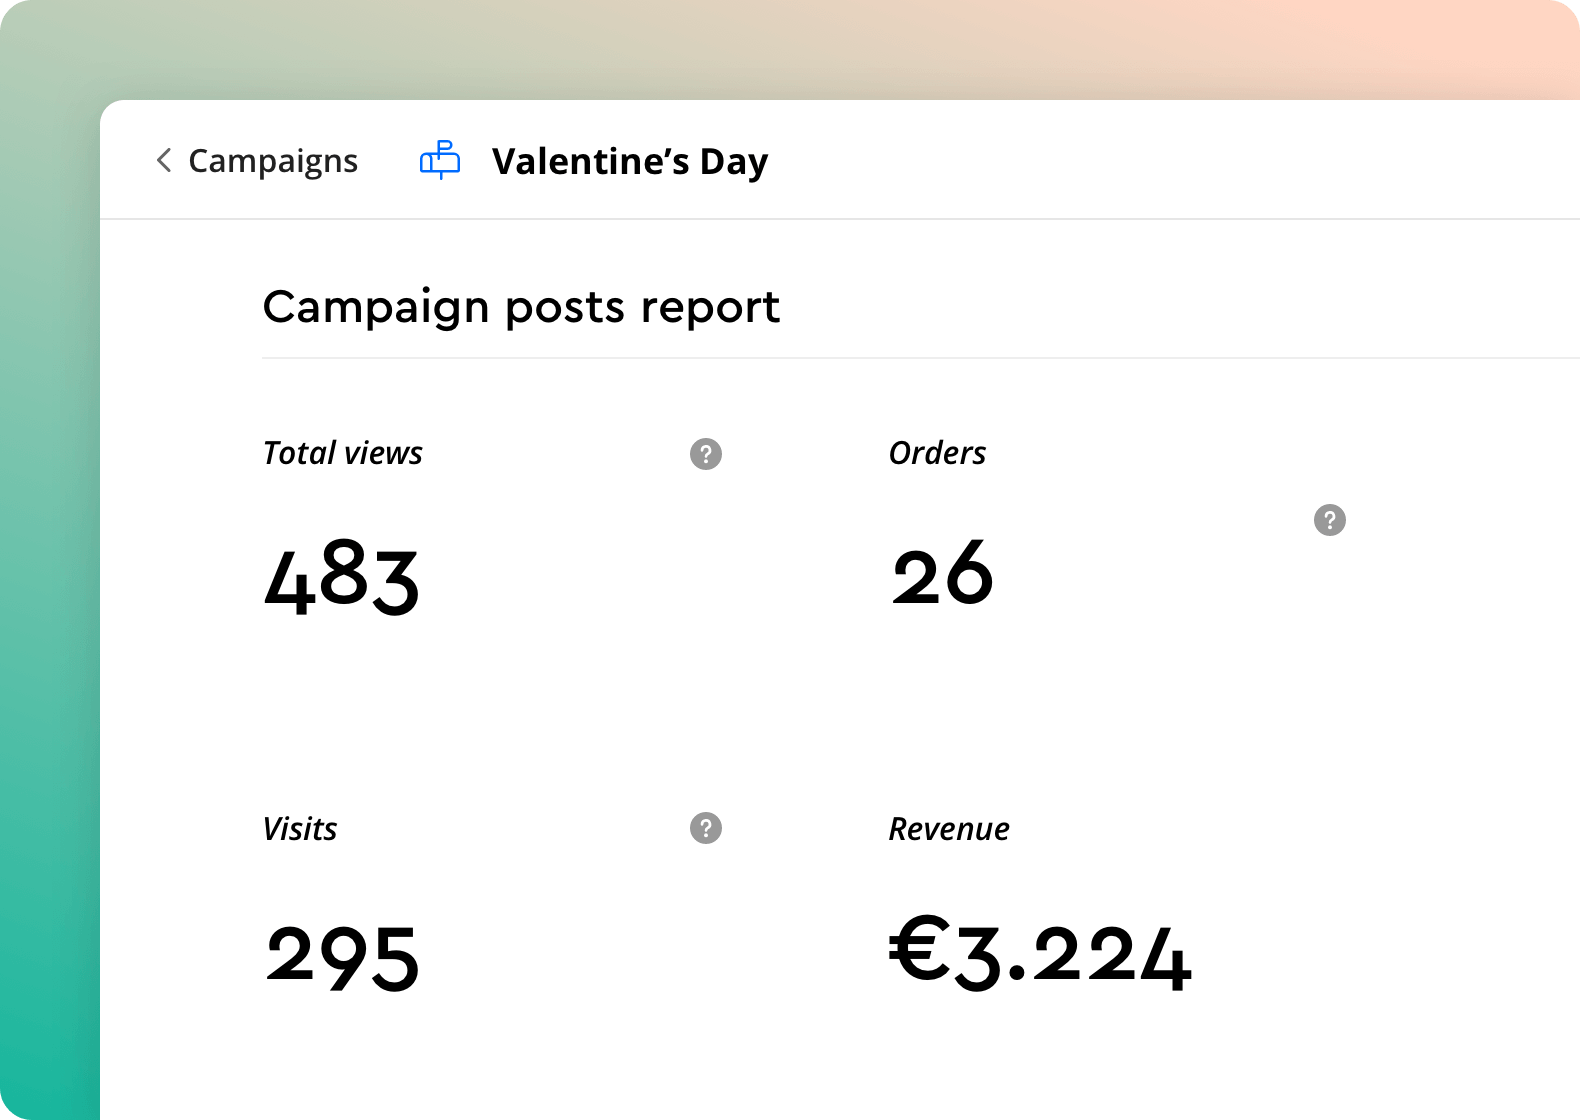 Check you orders and revenue in the campaign statistics